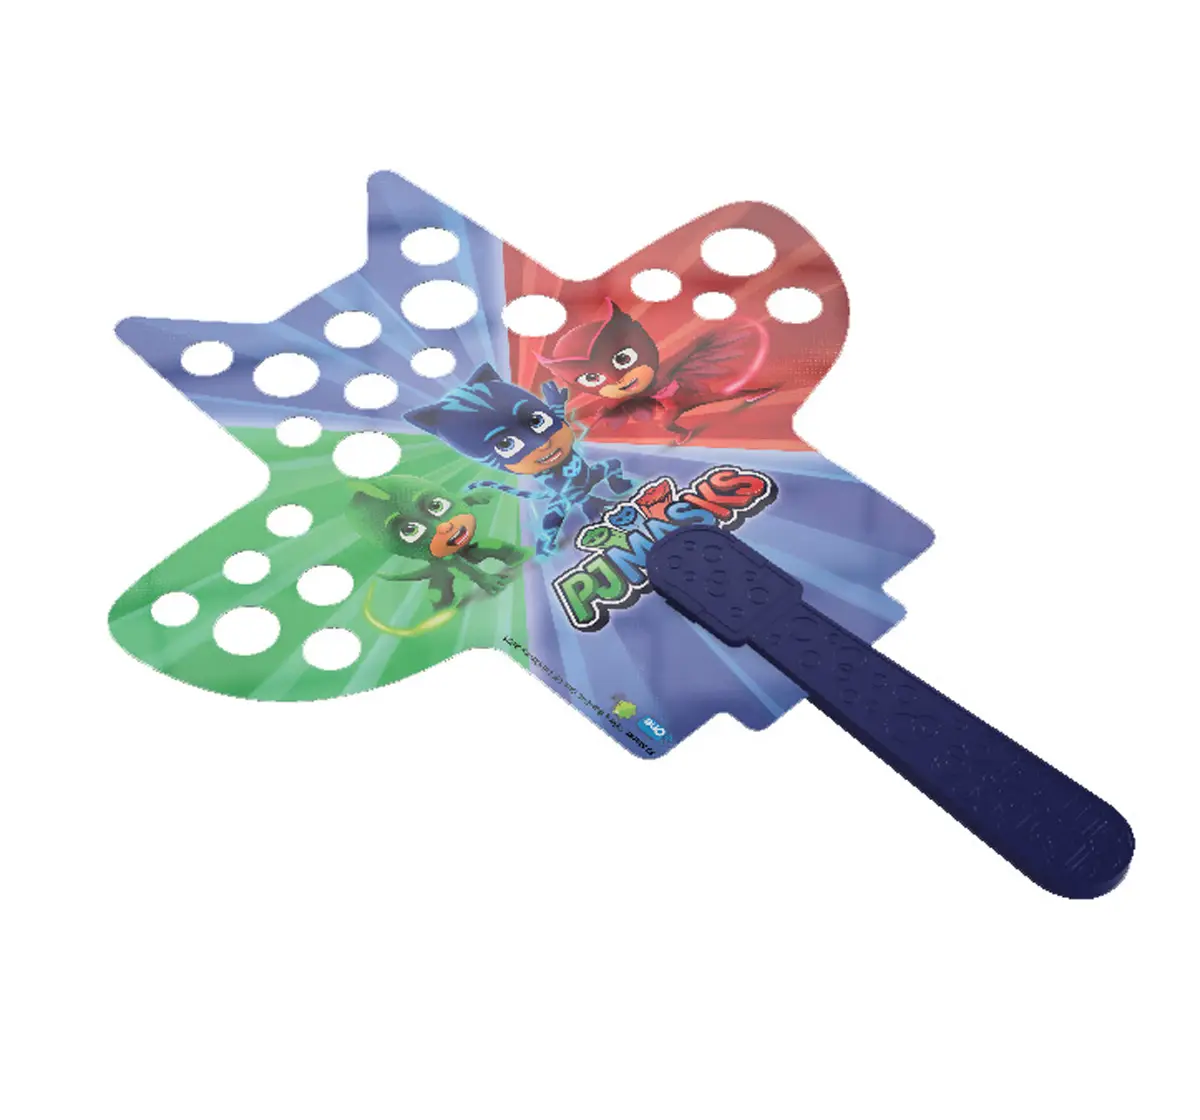 Bubble Magic Fan Bubs PJ Masks, for The Kids 3 Years and Above